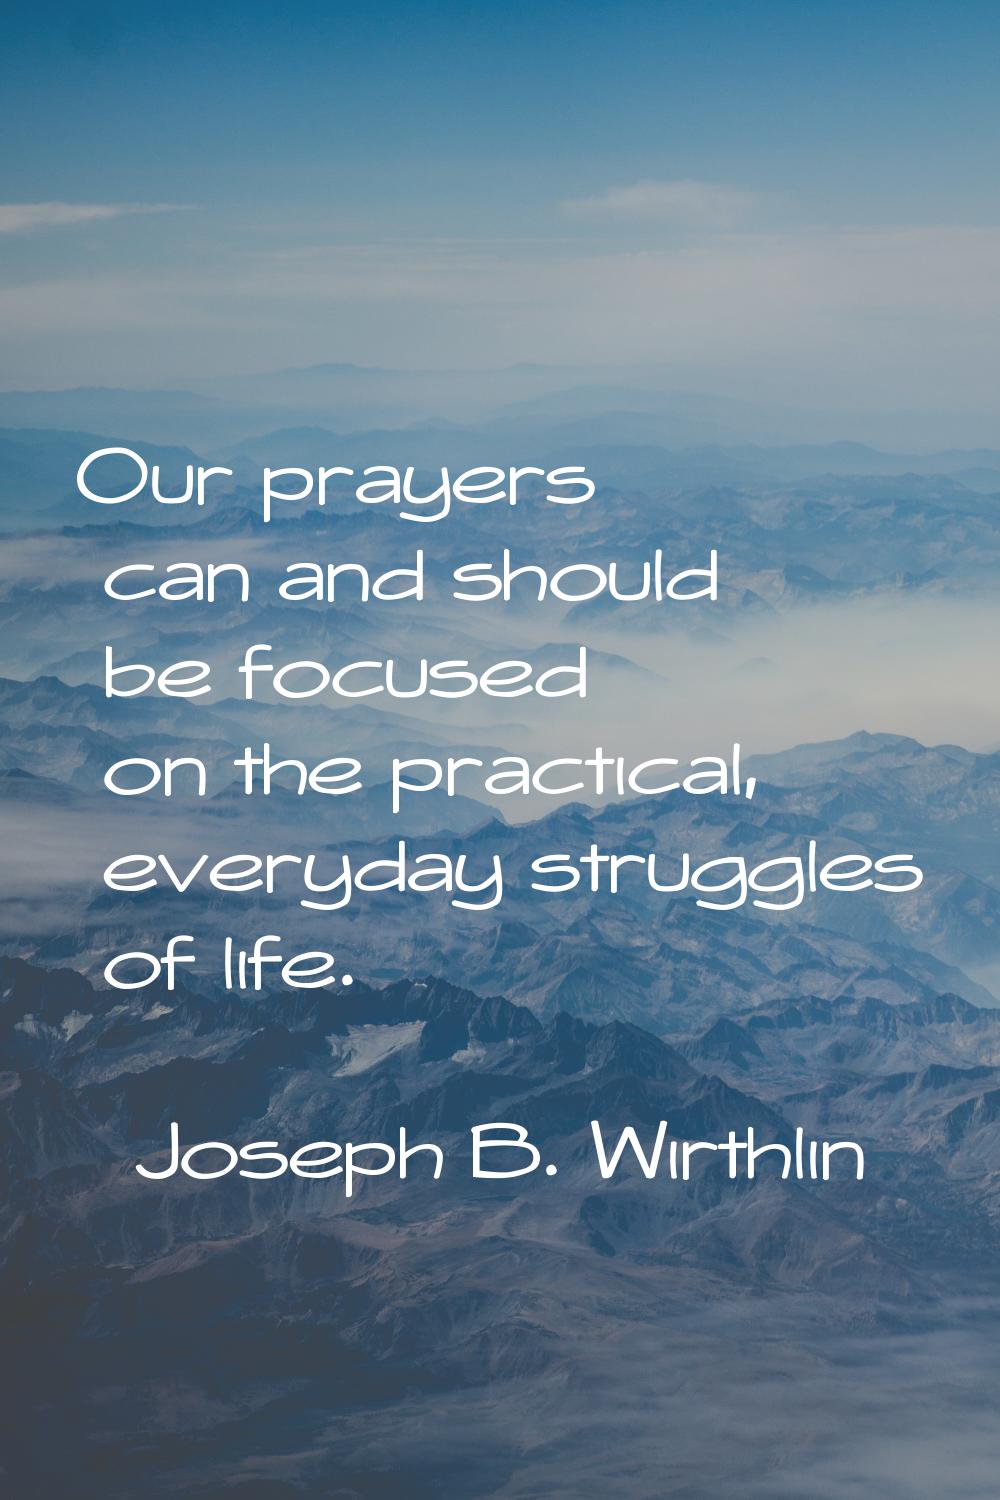 Our prayers can and should be focused on the practical, everyday struggles of life.